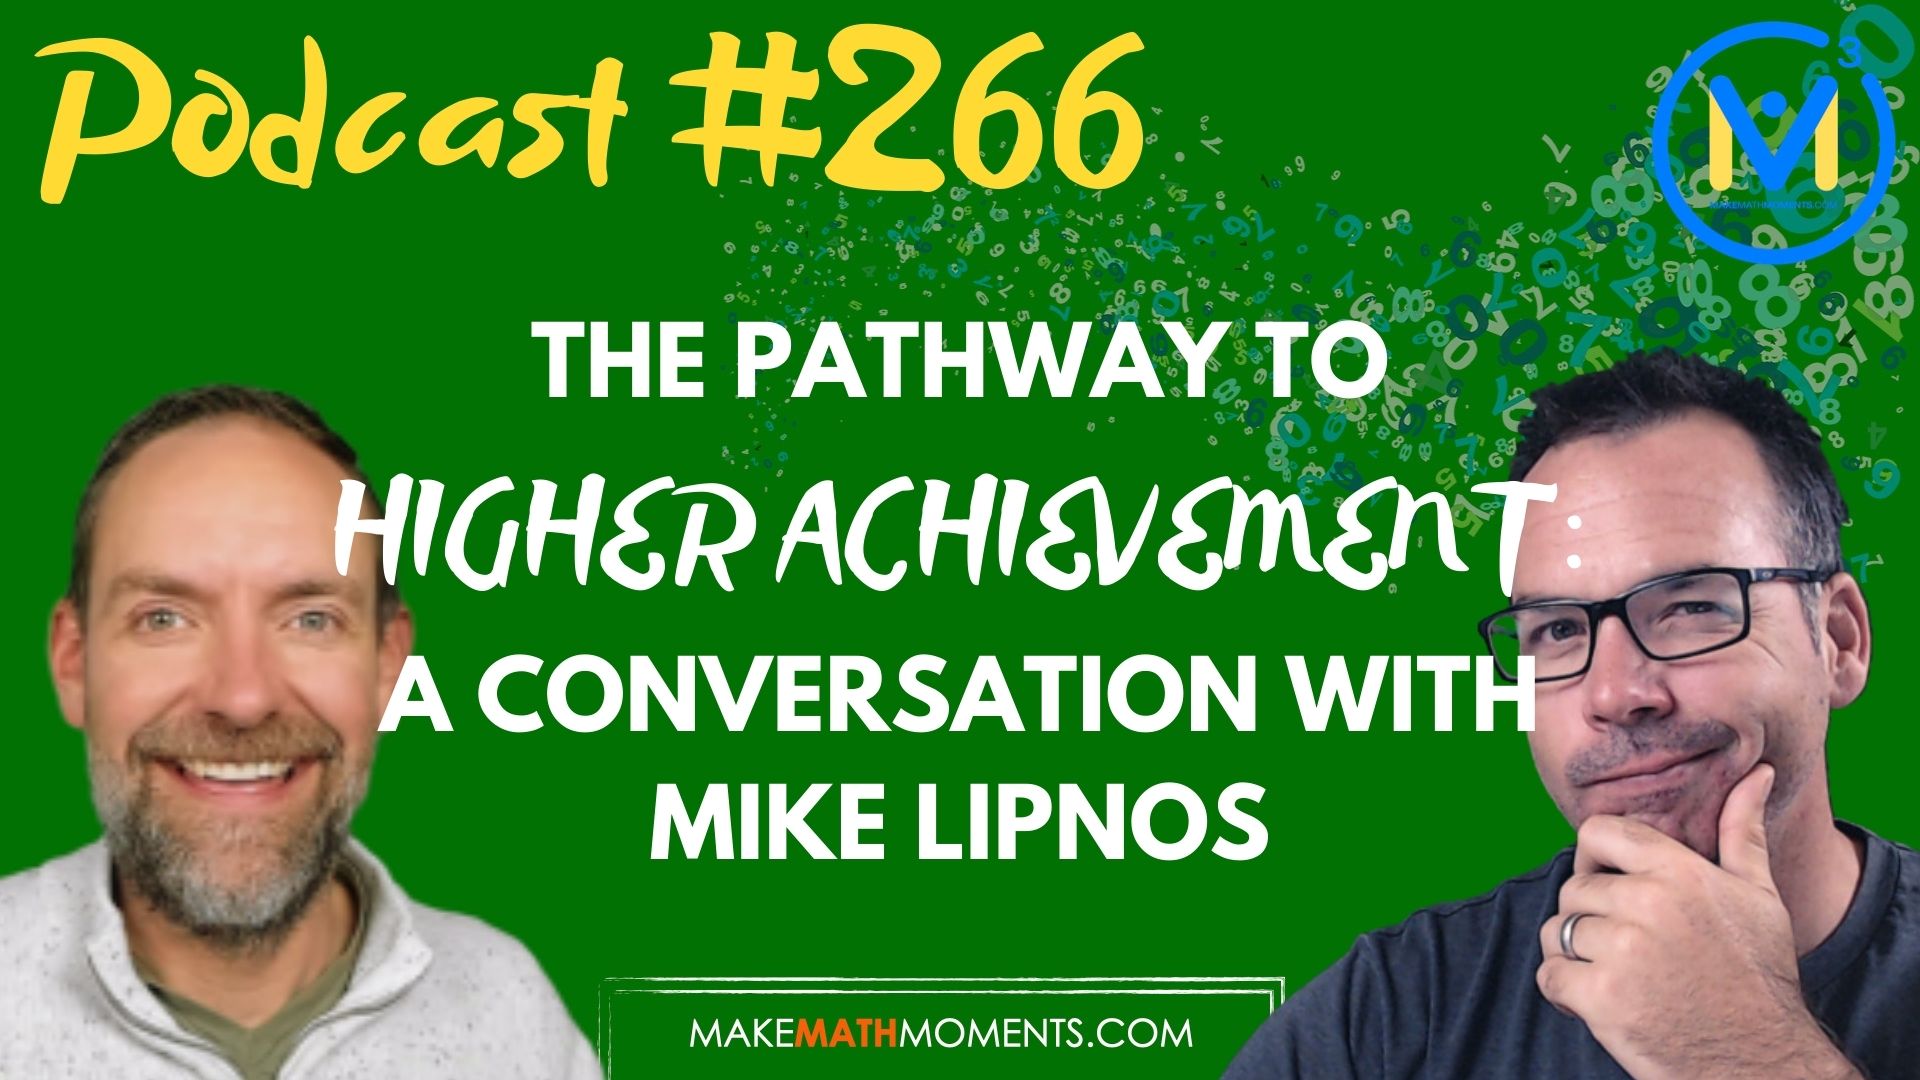 Episode #266: The Pathway To Higher Achievement: A Conversation with Mike Lipnos